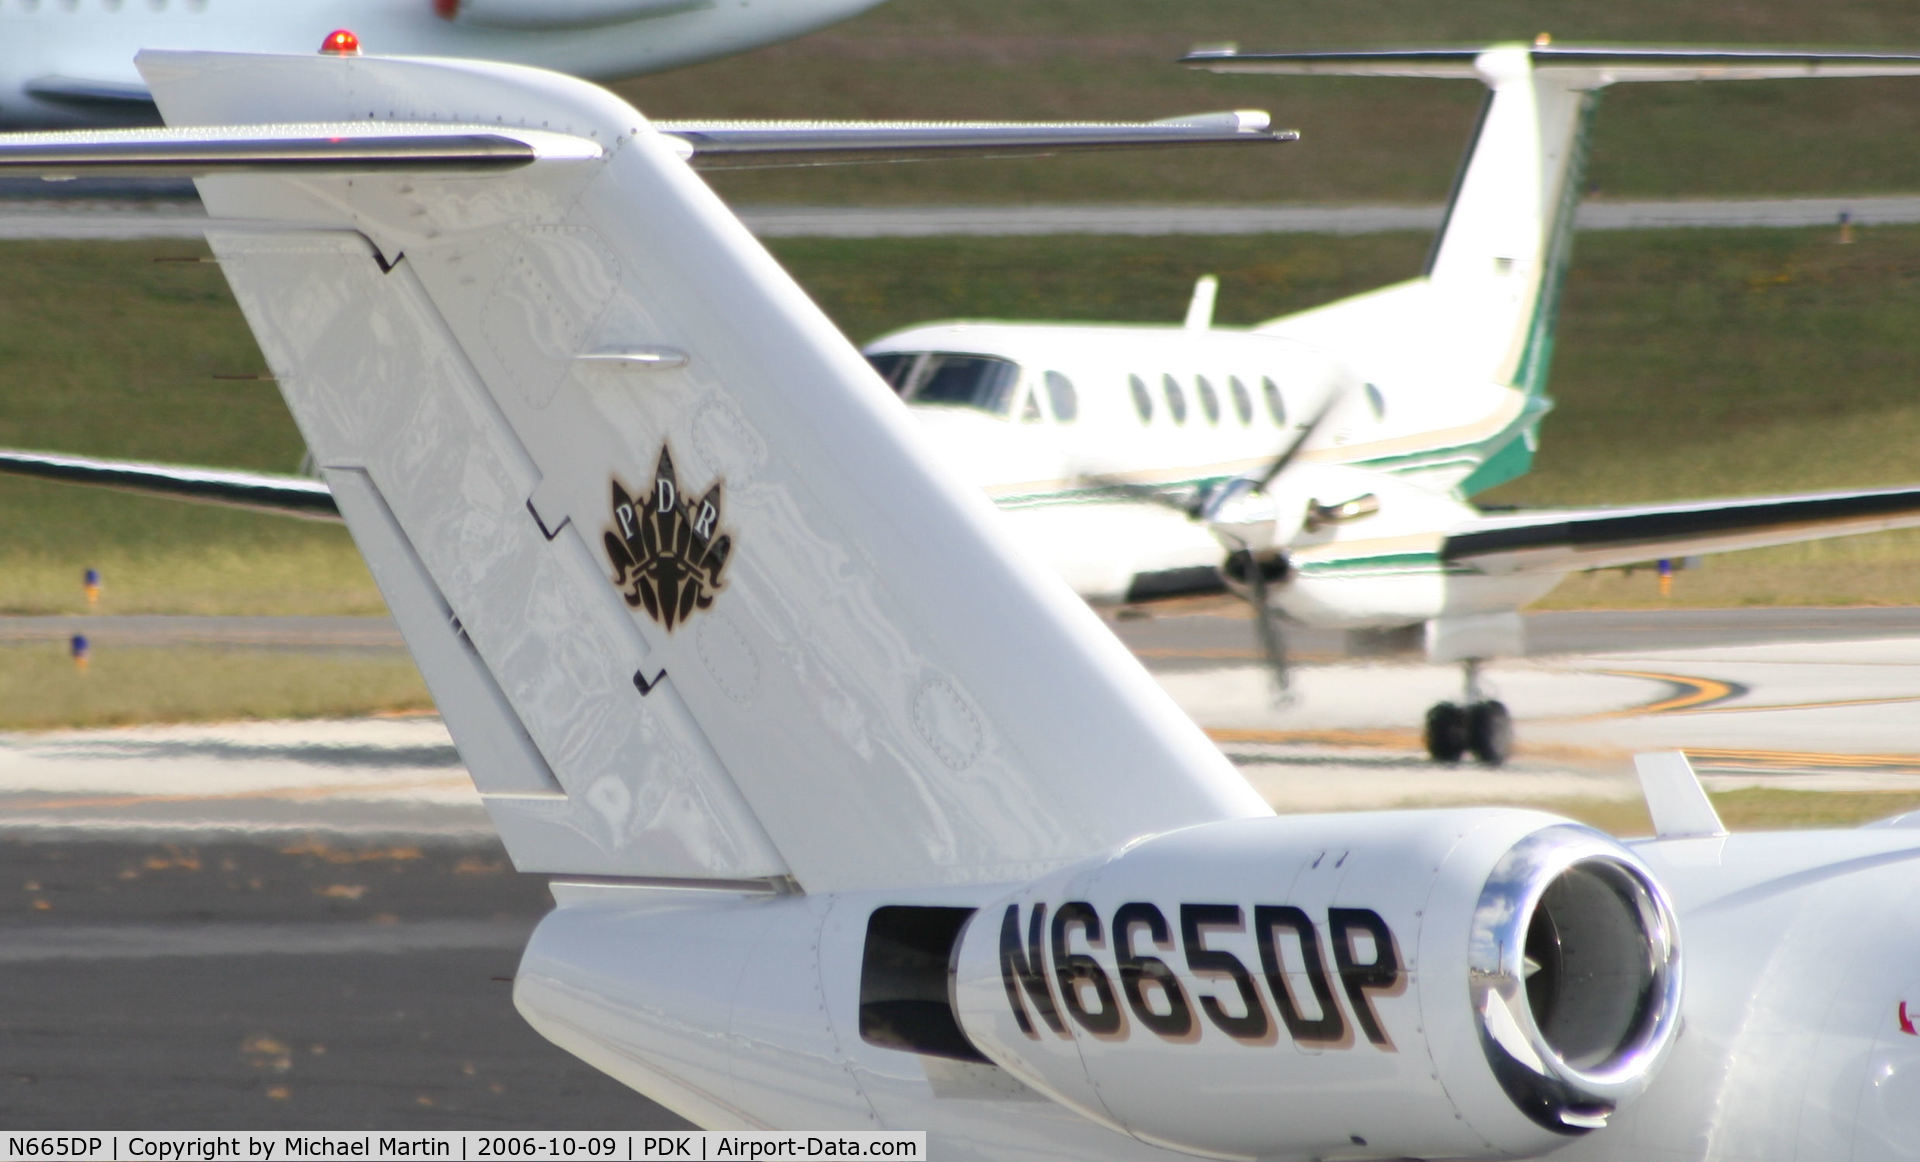 N665DP, 1993 Cessna 525 CitationJet C/N 525-0028, Tail Numbers